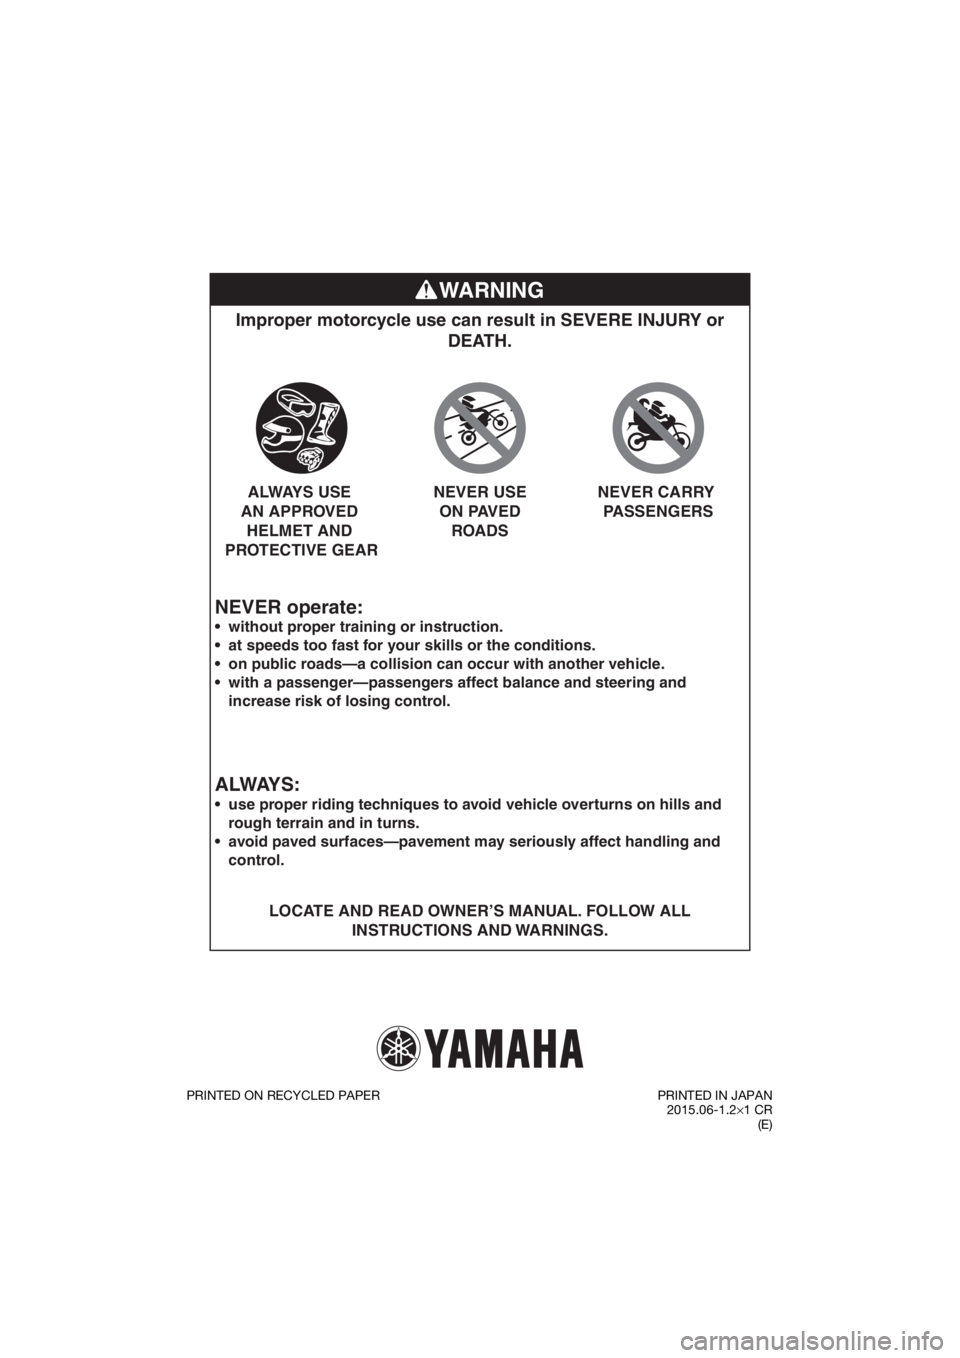 YAMAHA PW50 2016  Owners Manual WARNING
NEVER operate:
Improper motorcycle use can result in SEVERE INJURY or DEATH.
LOCATE AND READ OWNER’S MANUAL. FOLLOW ALL 
INSTRUCTIONS AND WARNINGS.



without proper training or instruction.